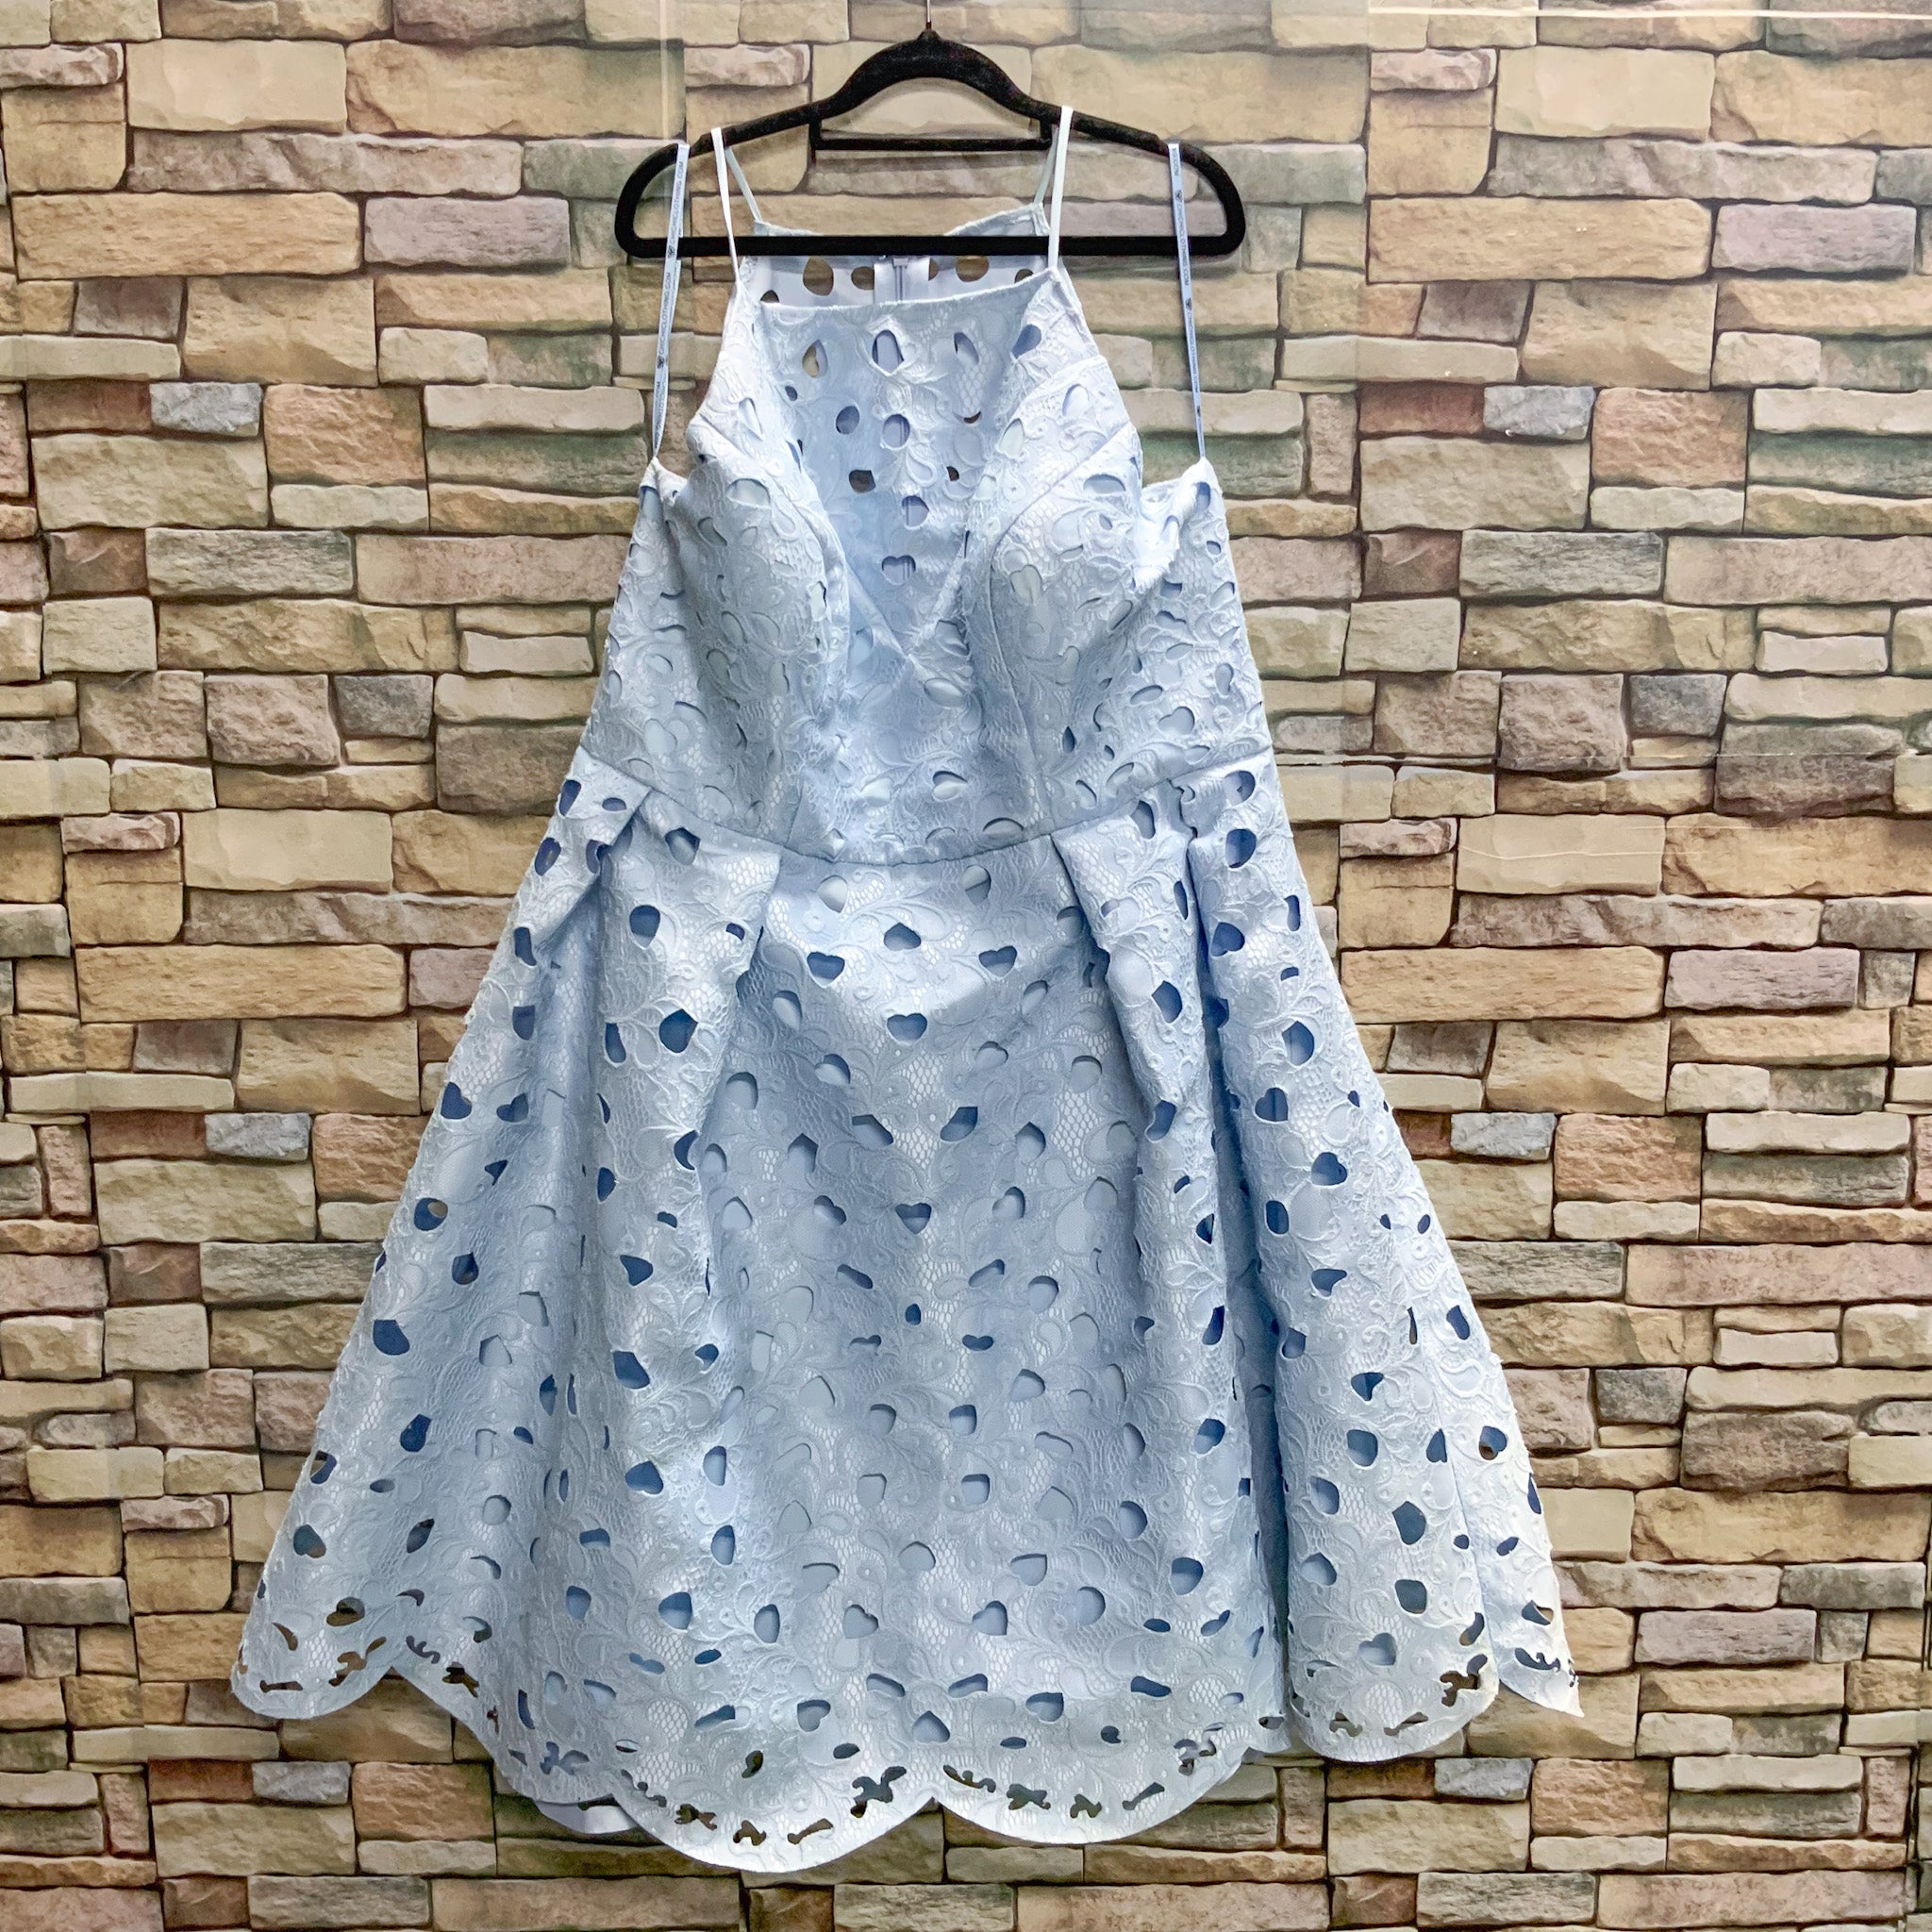 BNWOT CHI CHI London "Carli" Baby Blue Lacey Fit & Flare Party Dress - Size 22